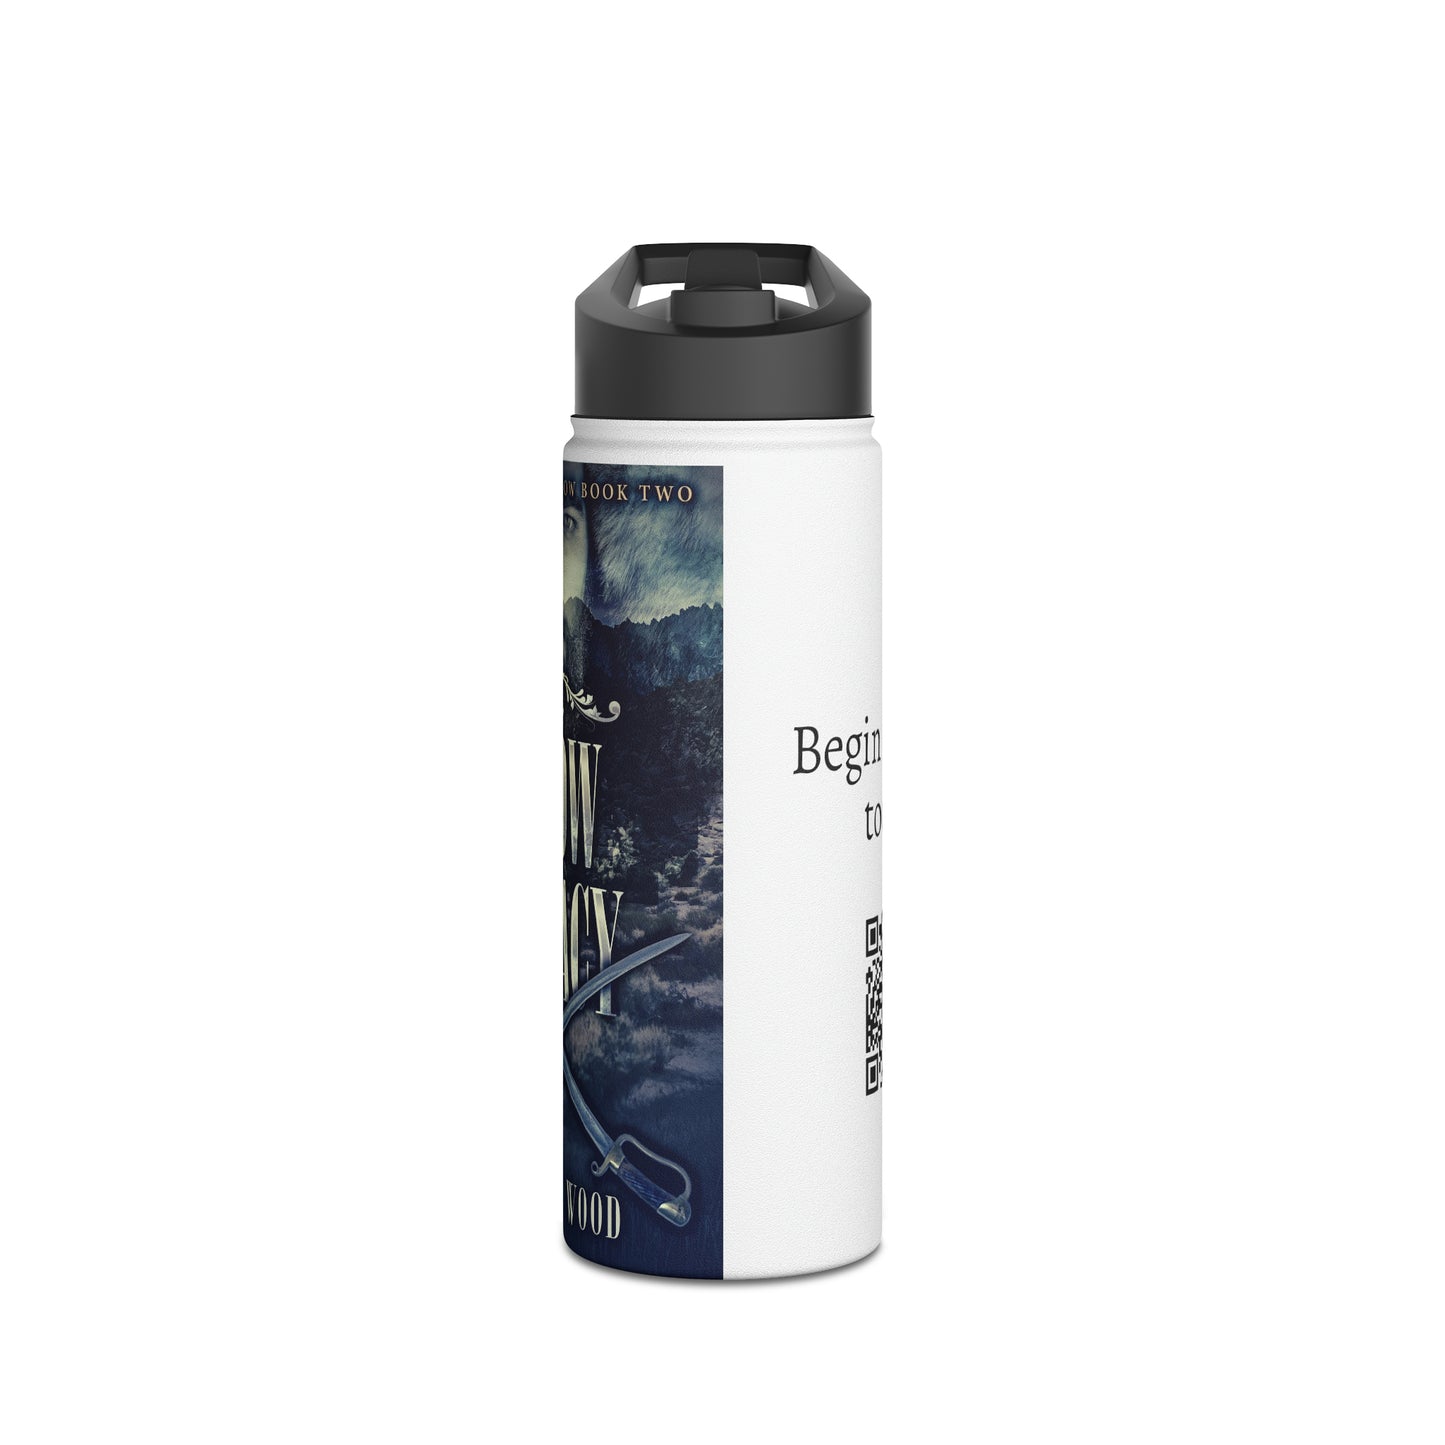 The Crow Legacy - Stainless Steel Water Bottle